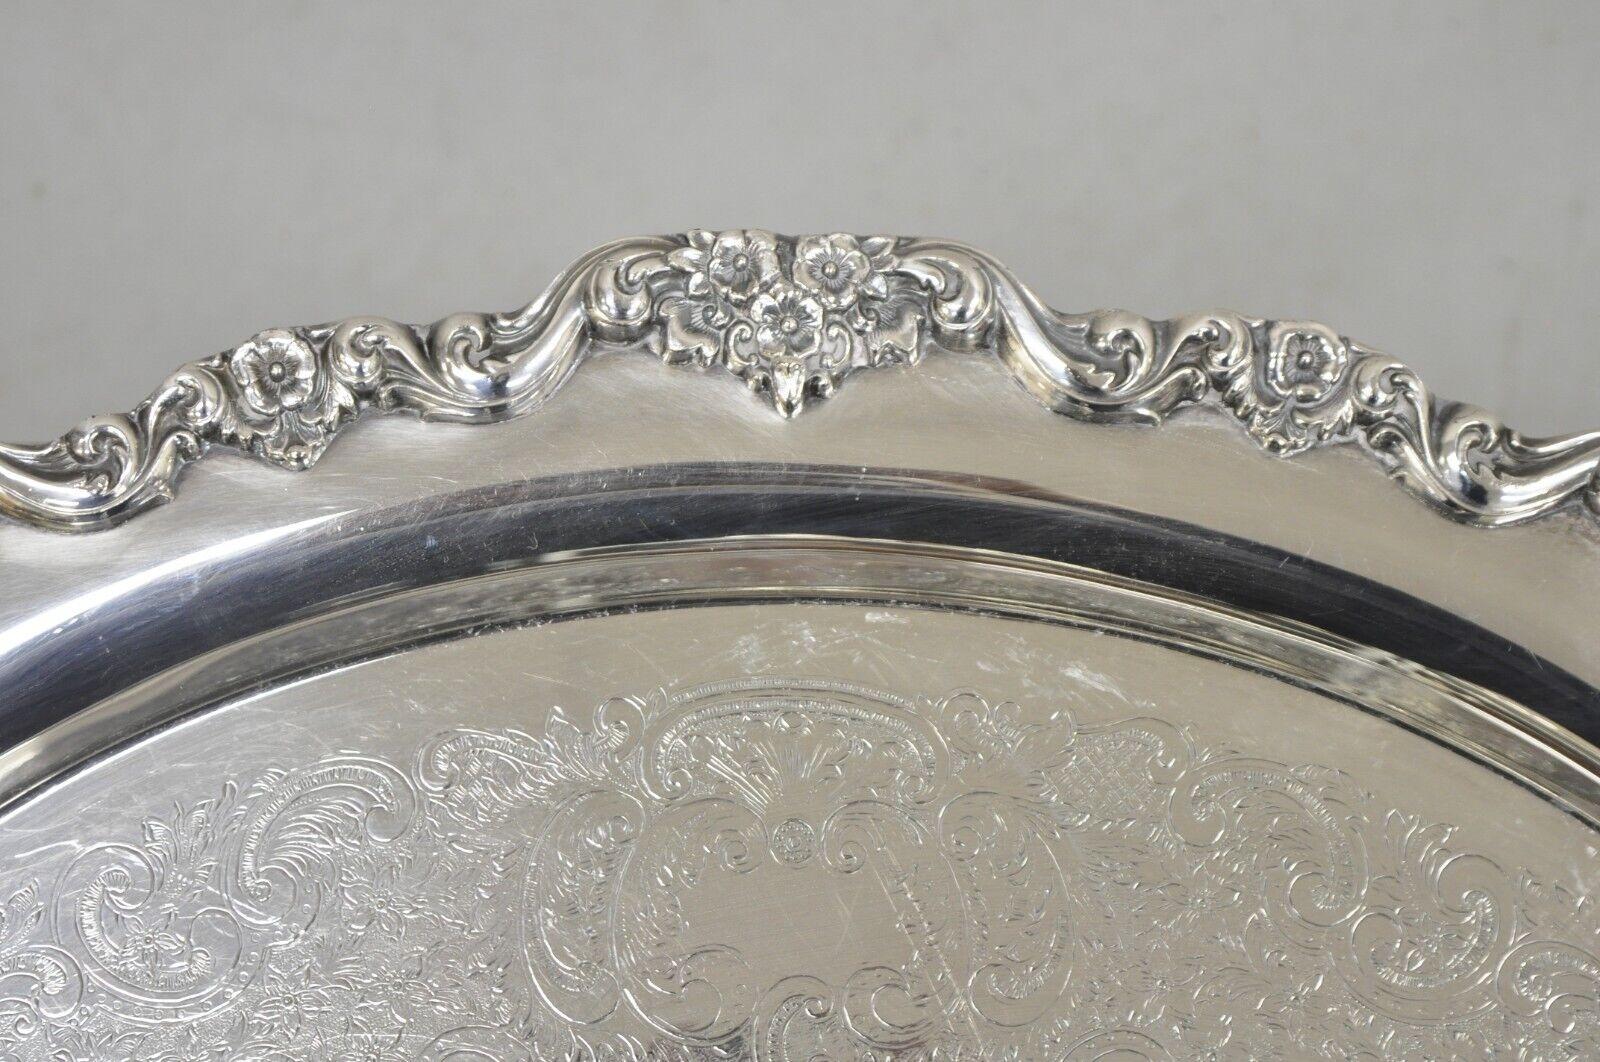 Vintage Towle 6955 Large Silver Plated Oval Victorian Serving Platter Tray For Sale 2